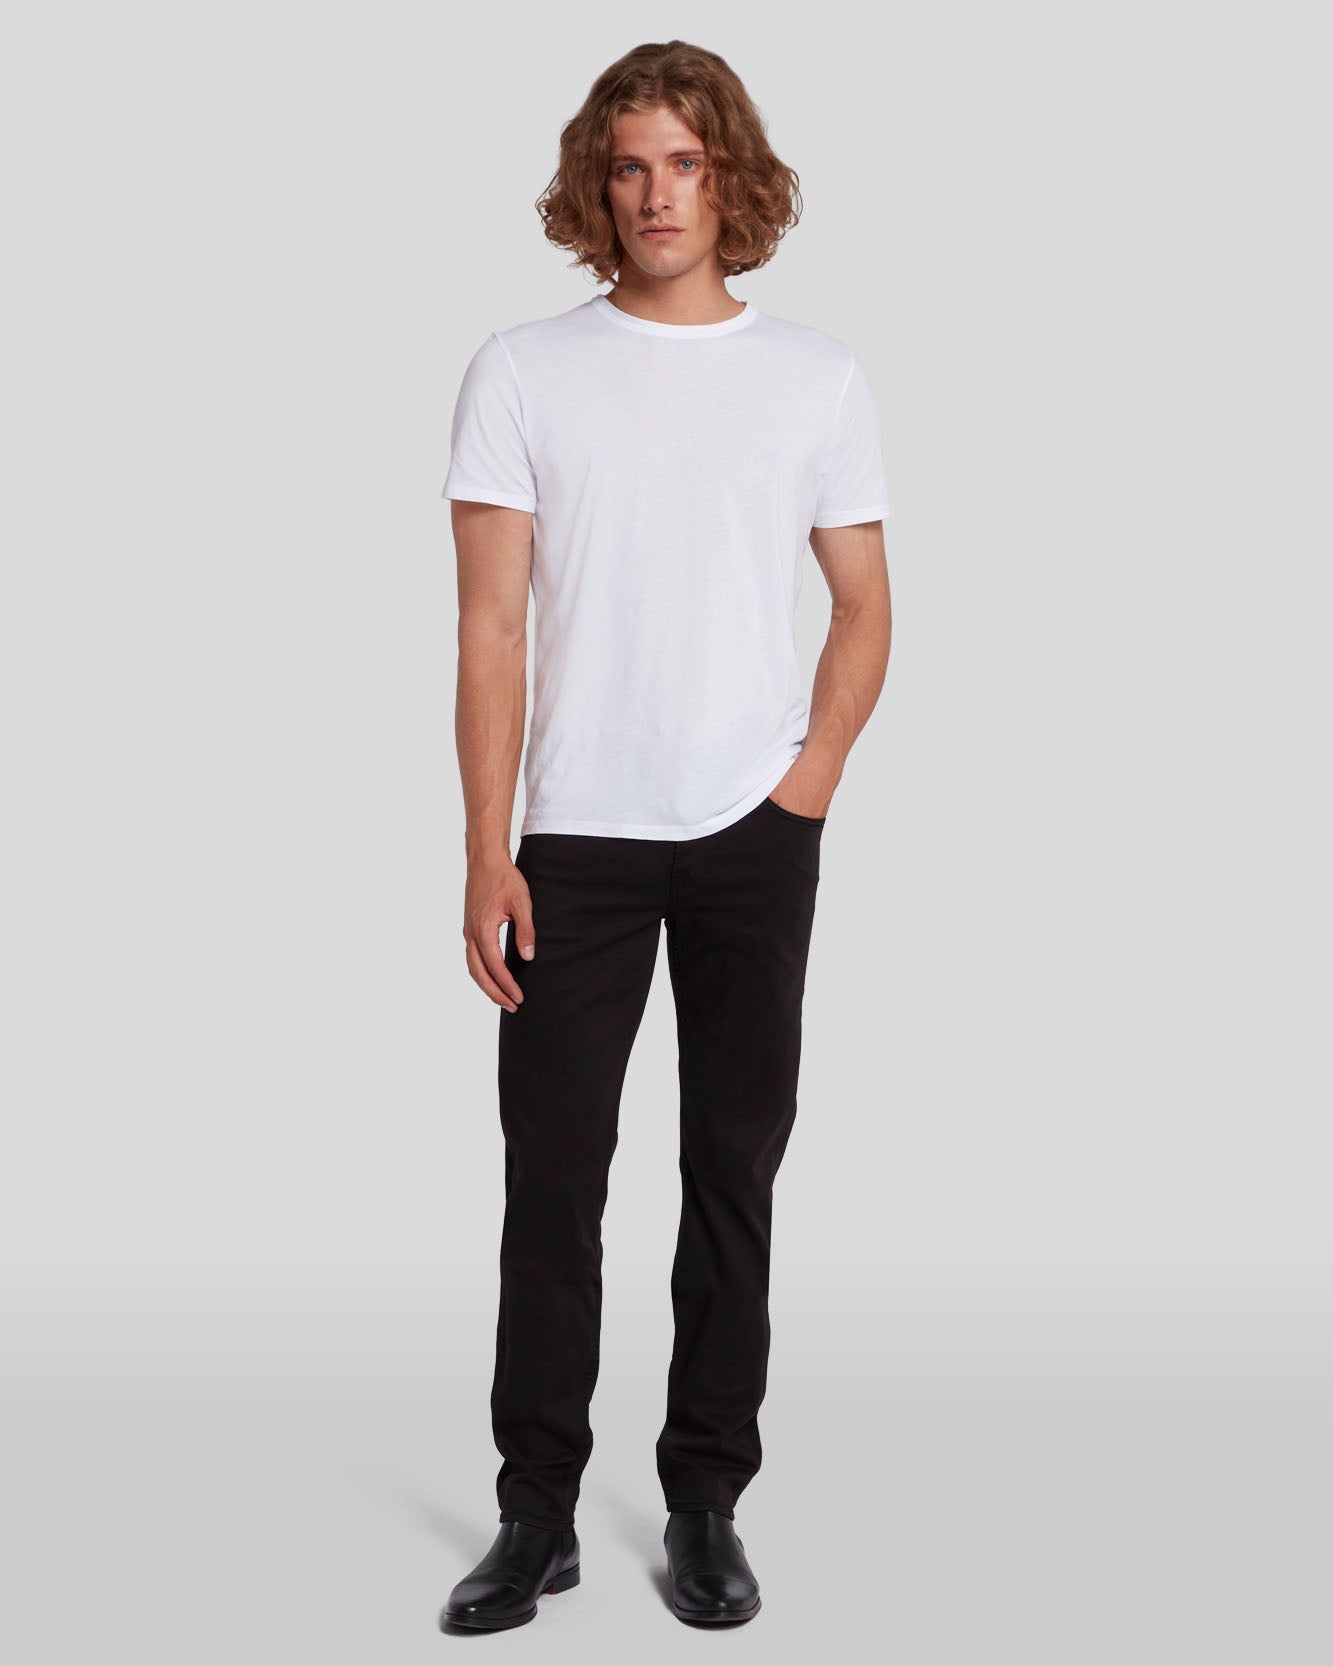 Luxe Performance Plus Slimmy in Black | 7 For All Mankind